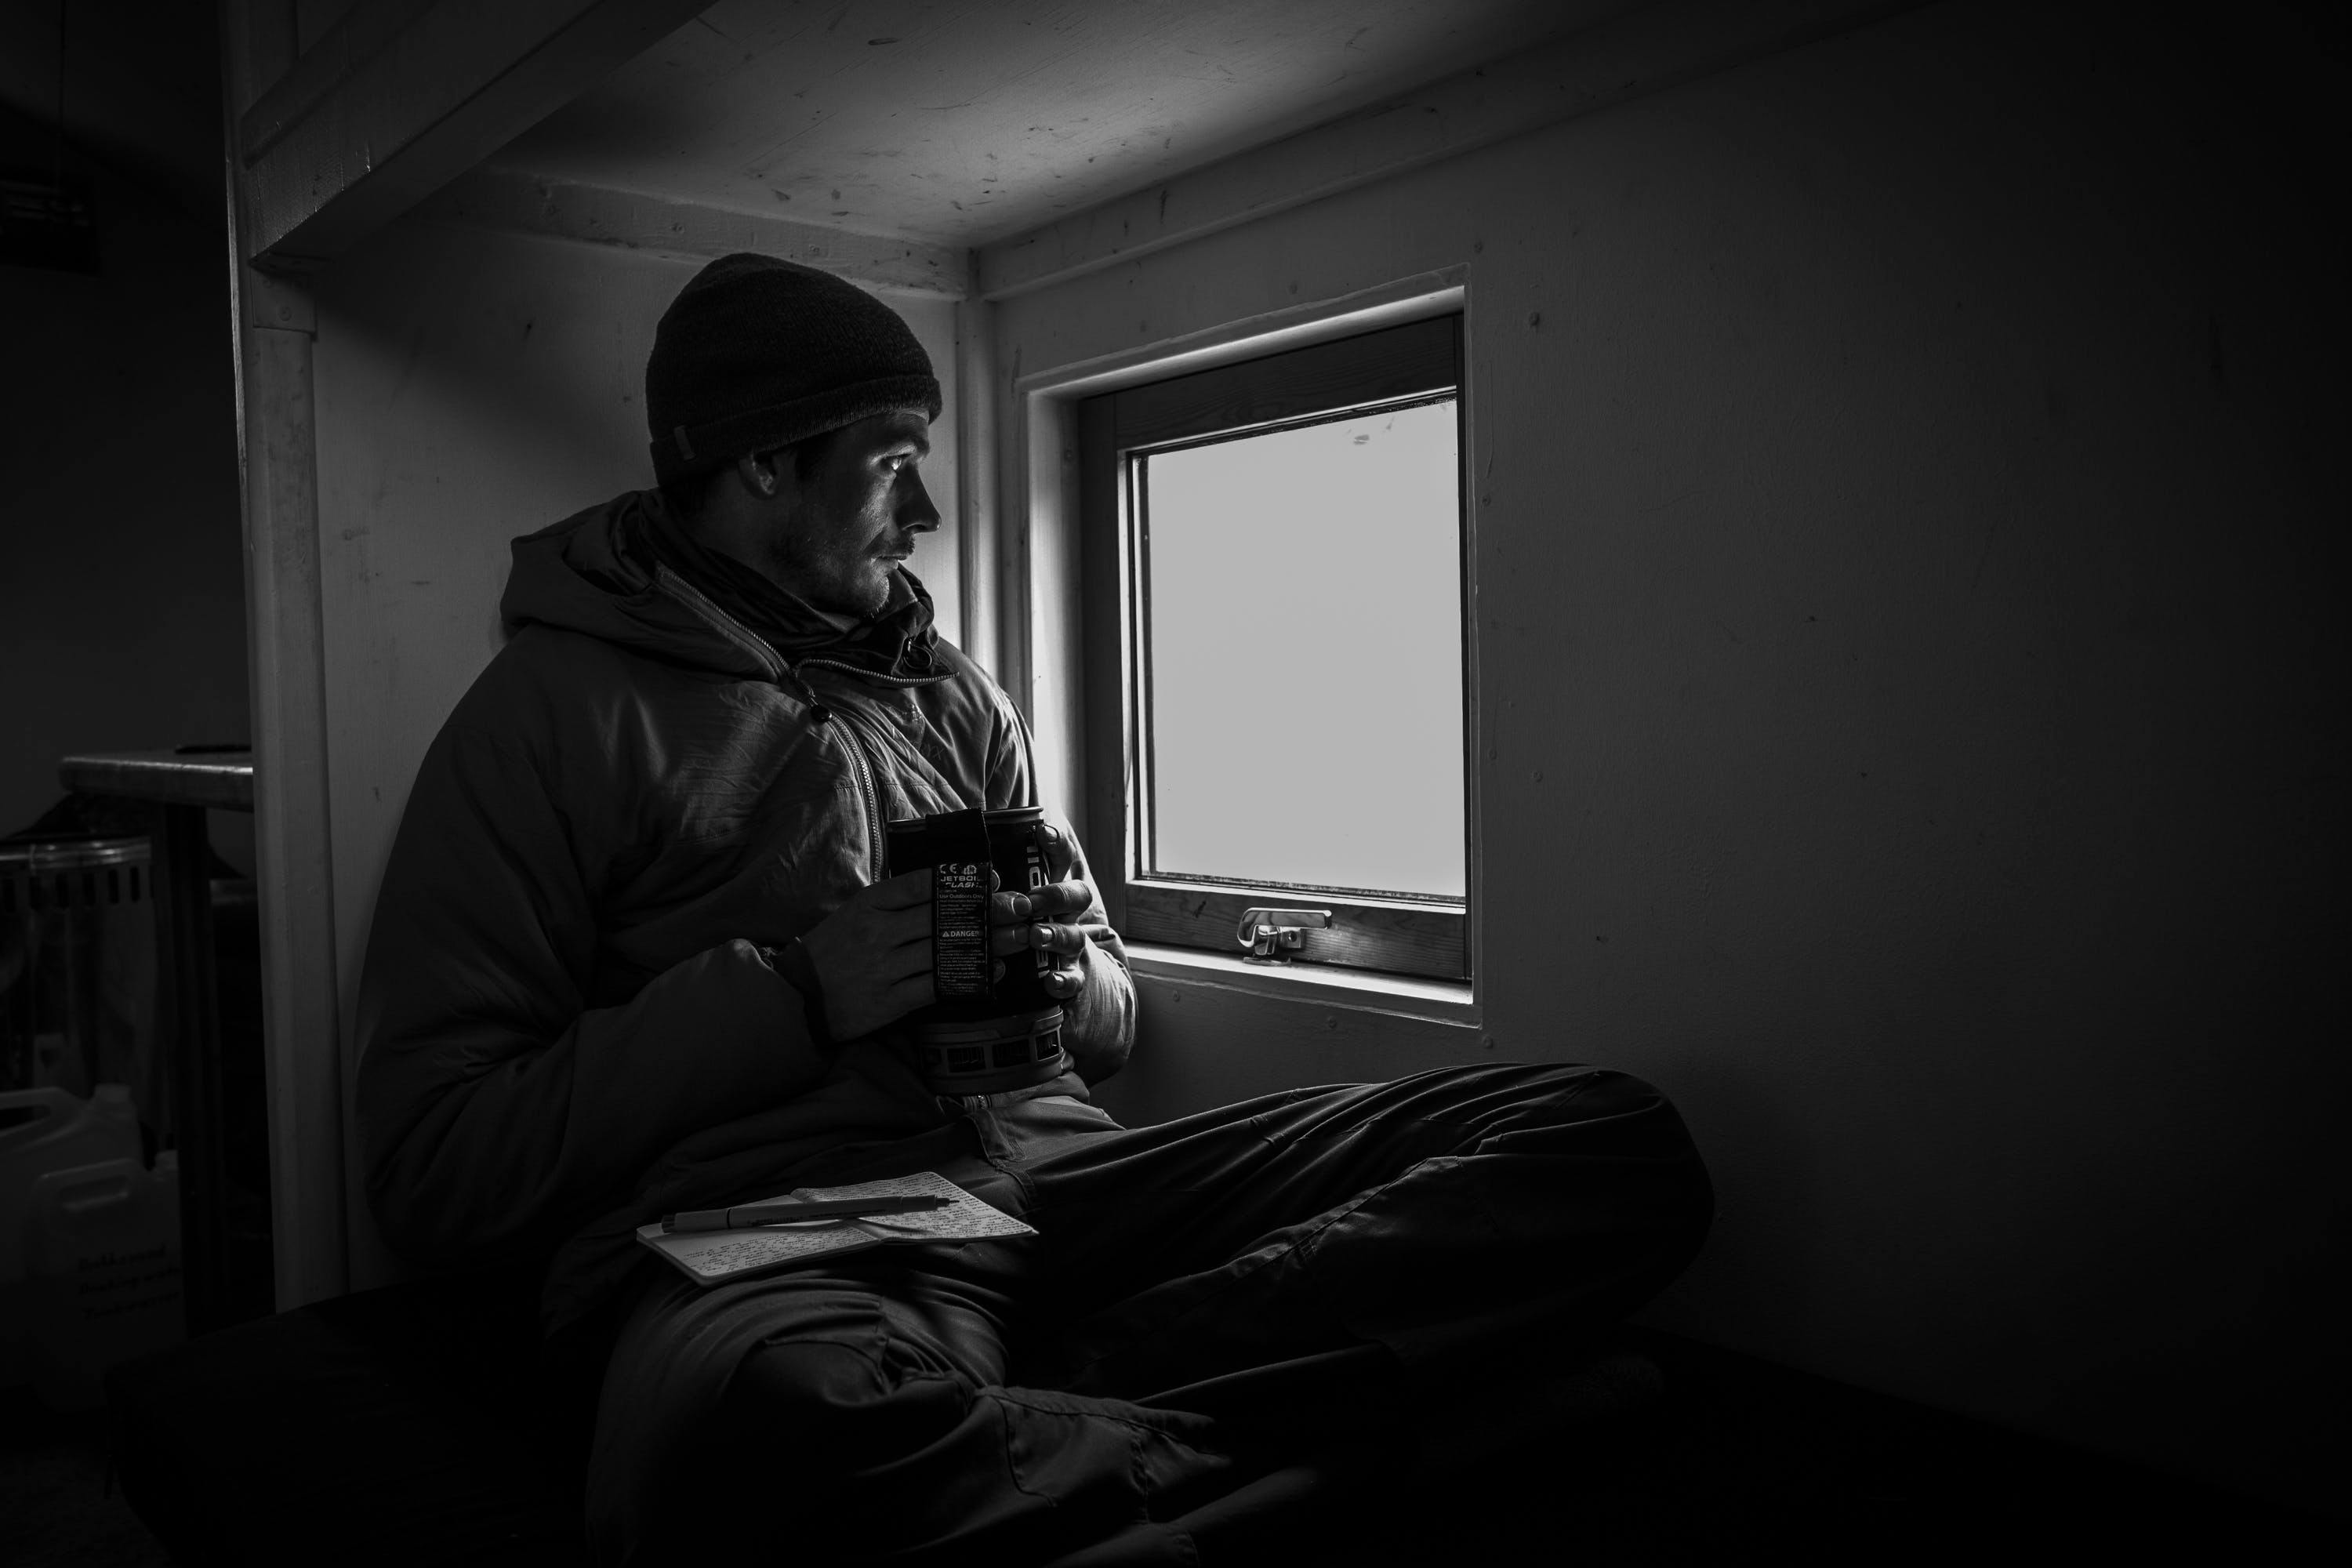 A man holds a mug of tea and looks out the window of a dark hut.